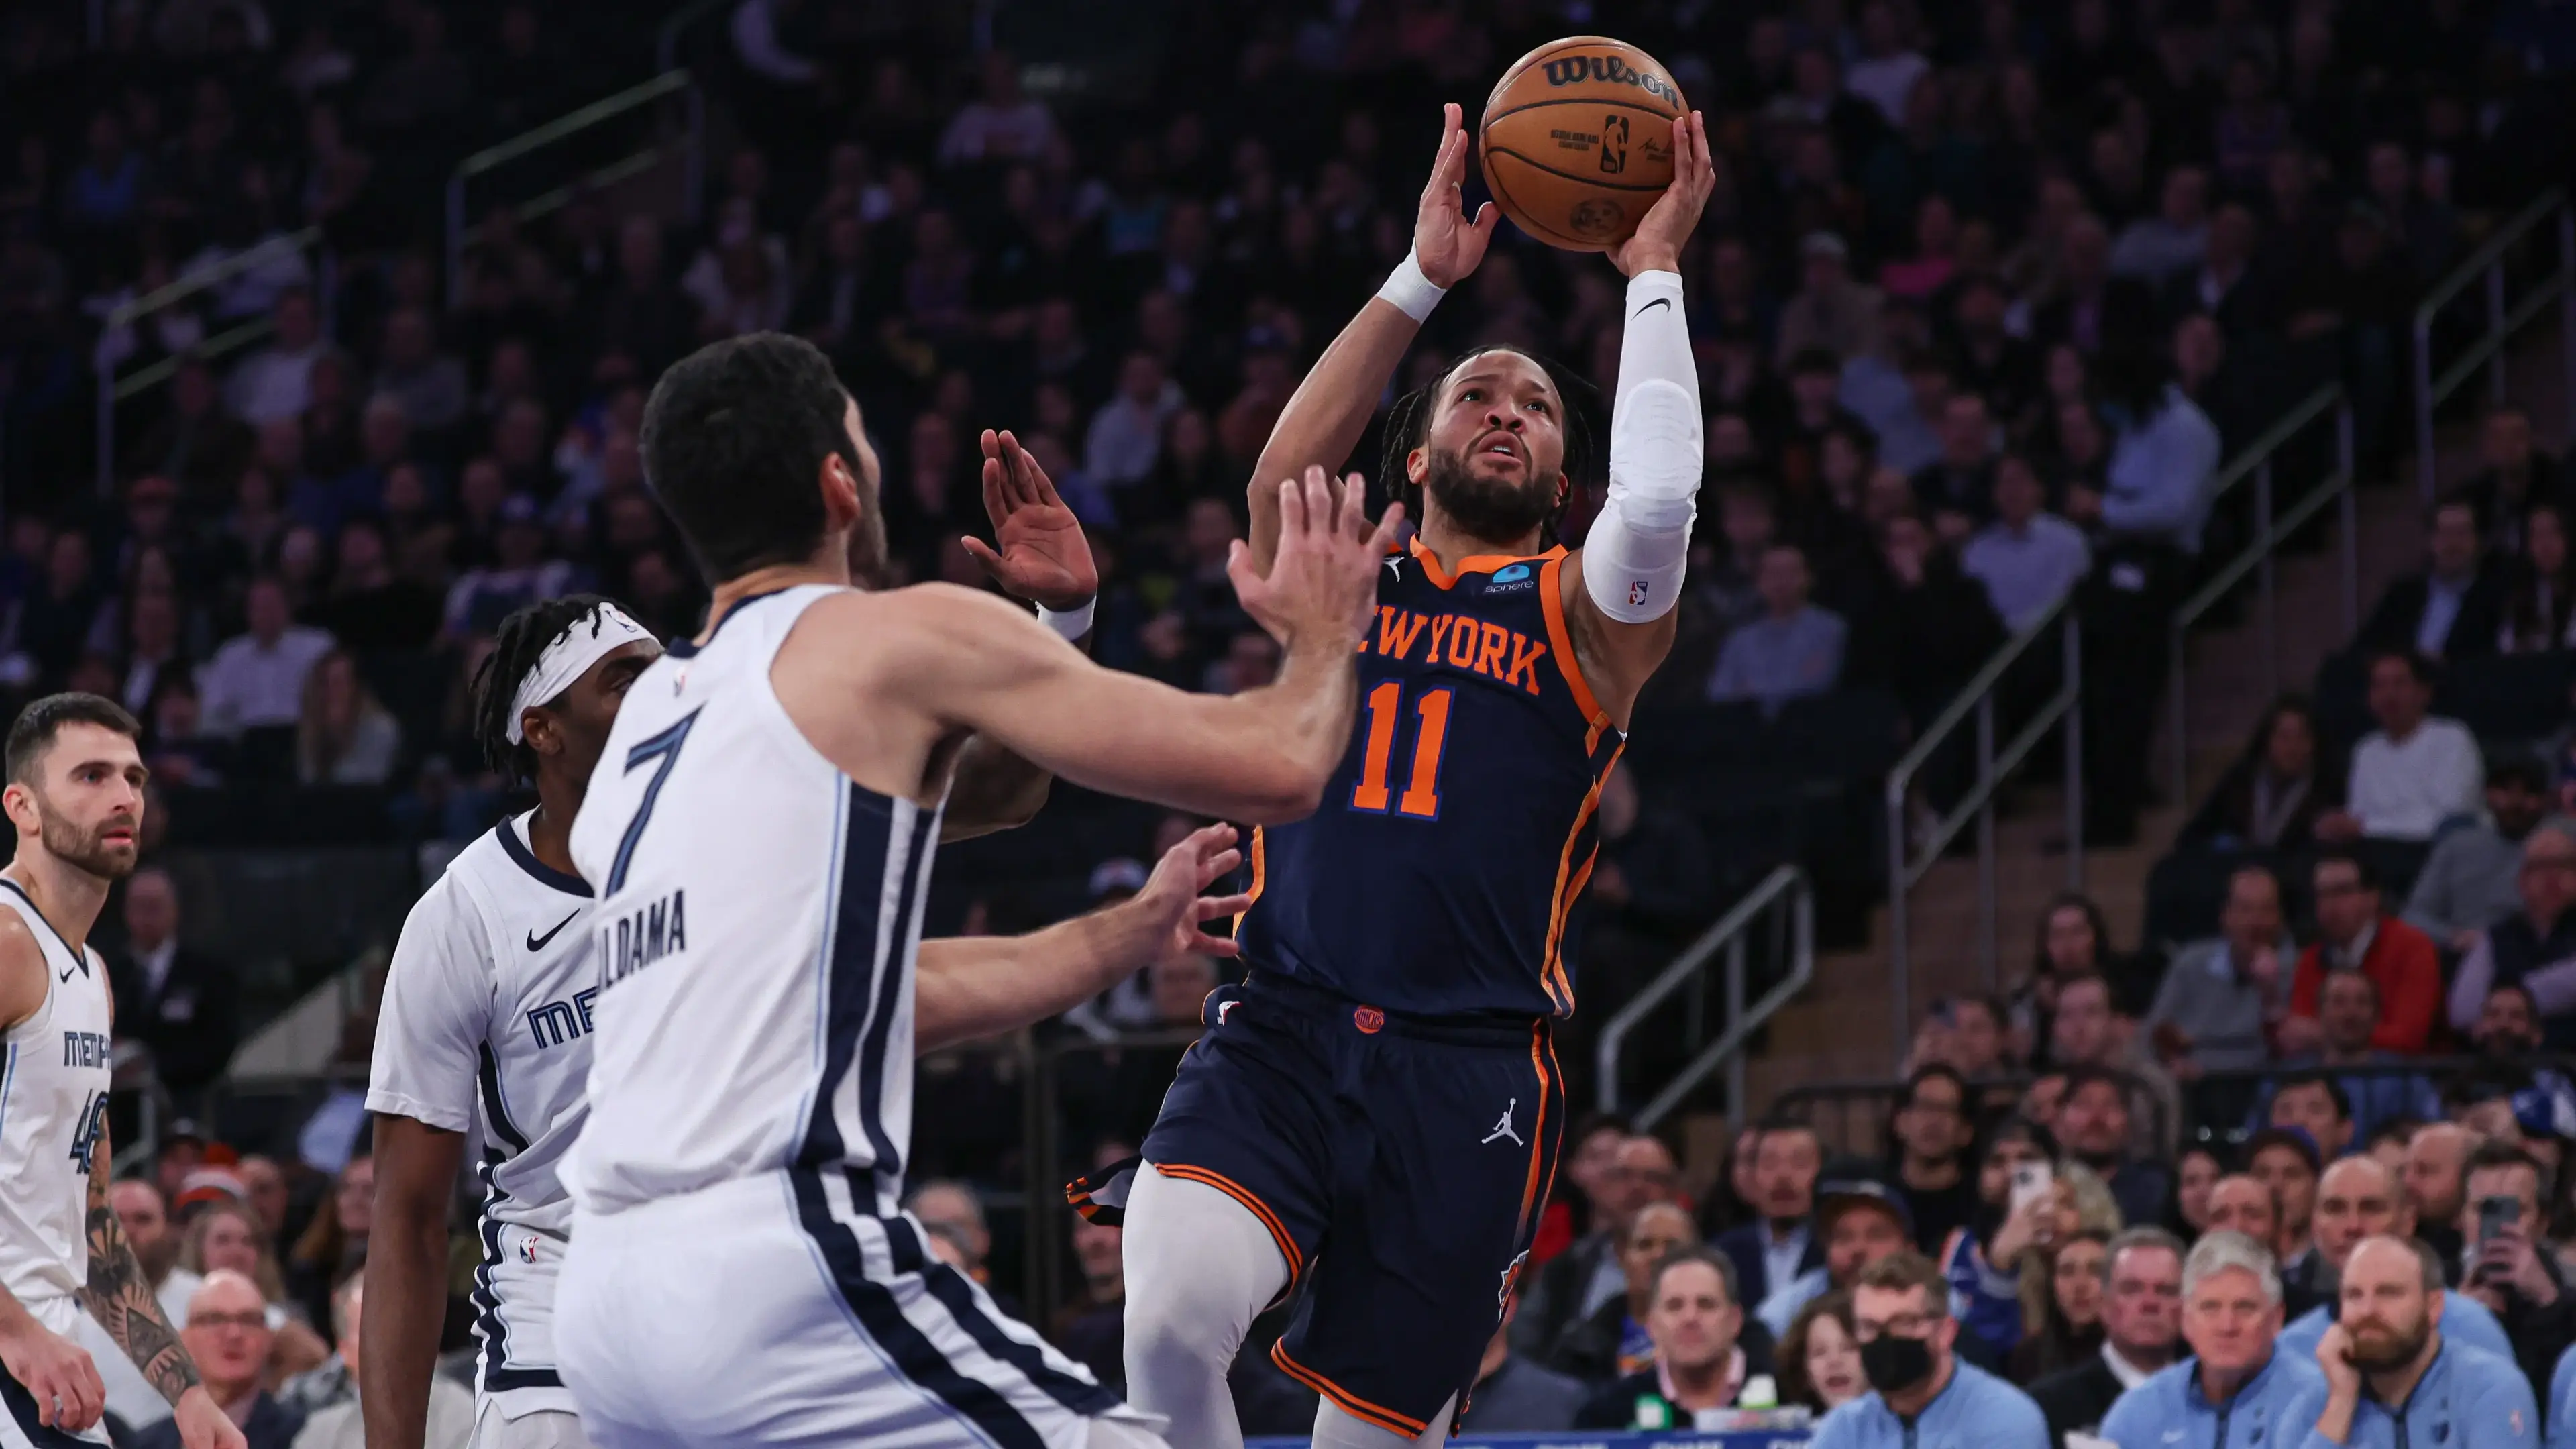 New York Knicks guard Jalen Brunson (11) drives for a shot against Memphis Grizzlies forward Santi Aldama (7) during the first quarter at Madison Square Garden / Vincent Carchietta - USA TODAY Sports